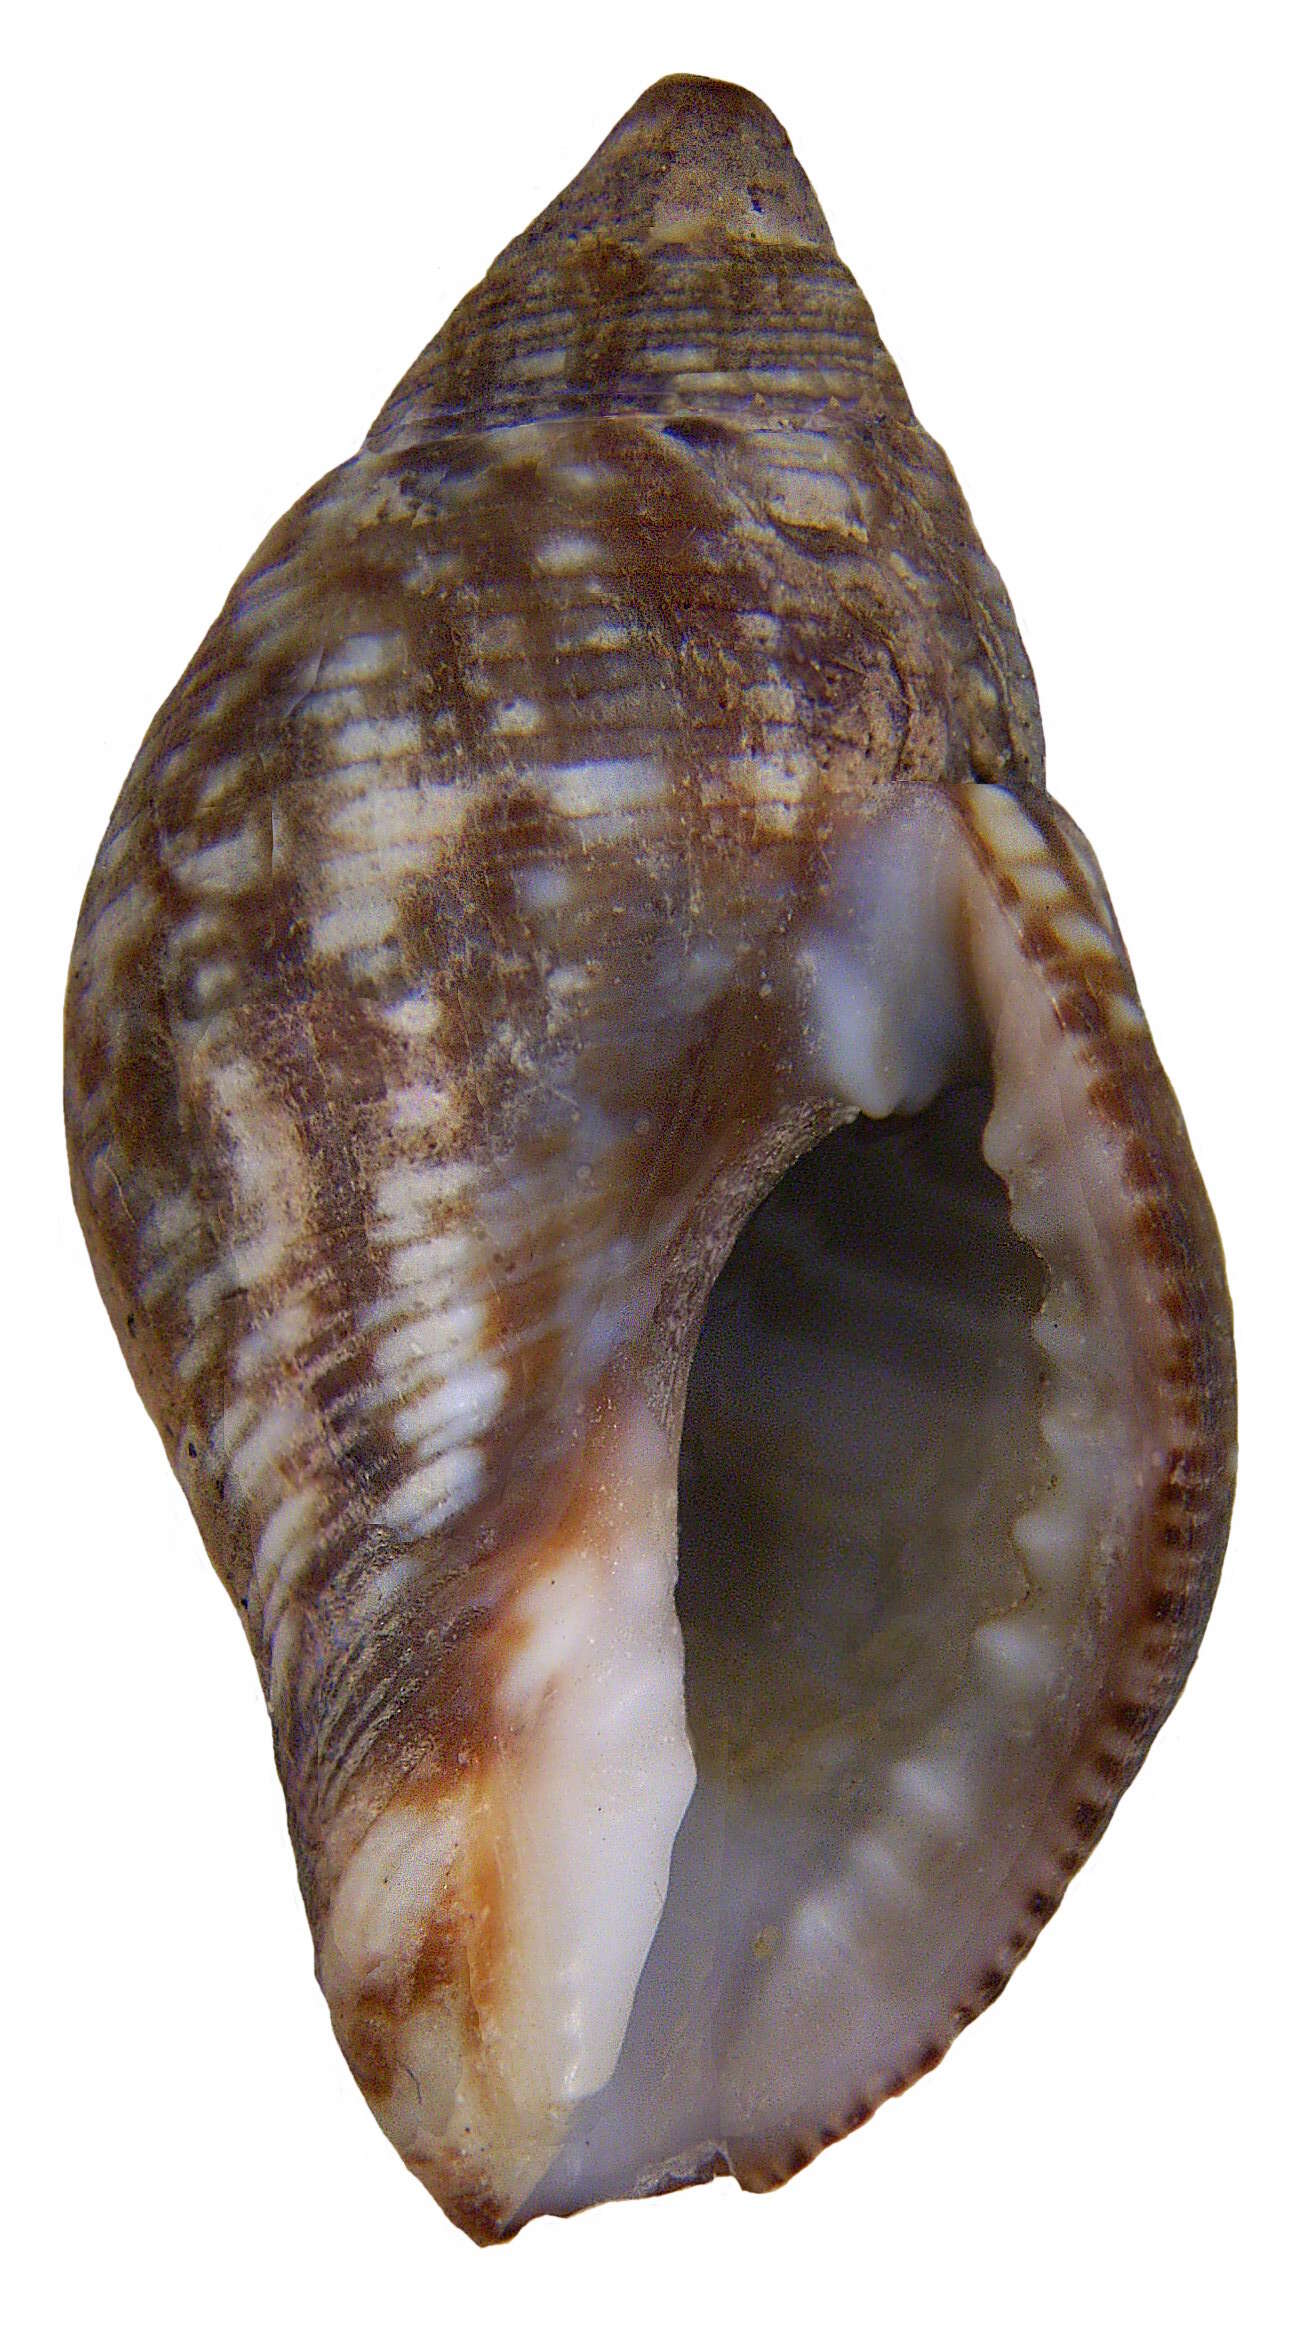 Image of spotted pisania